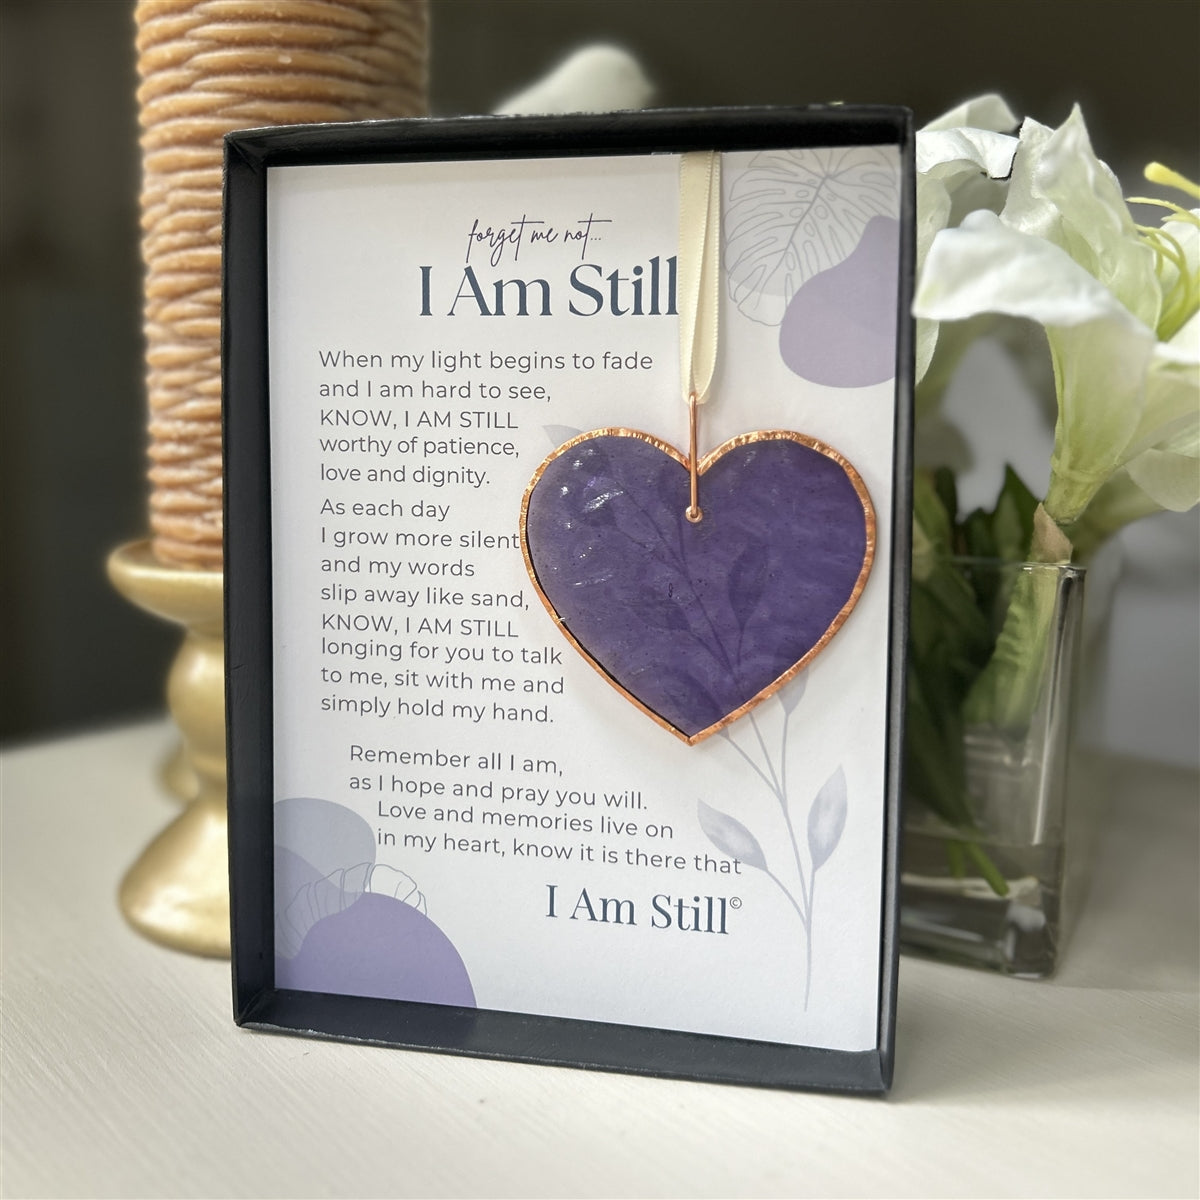 Alzheimer/Dementia Family Support Gift: Periwinkle stained glass heart with copper edging and ring packaged with &quot;I am Still&quot; Poem in a black box with a clear lid